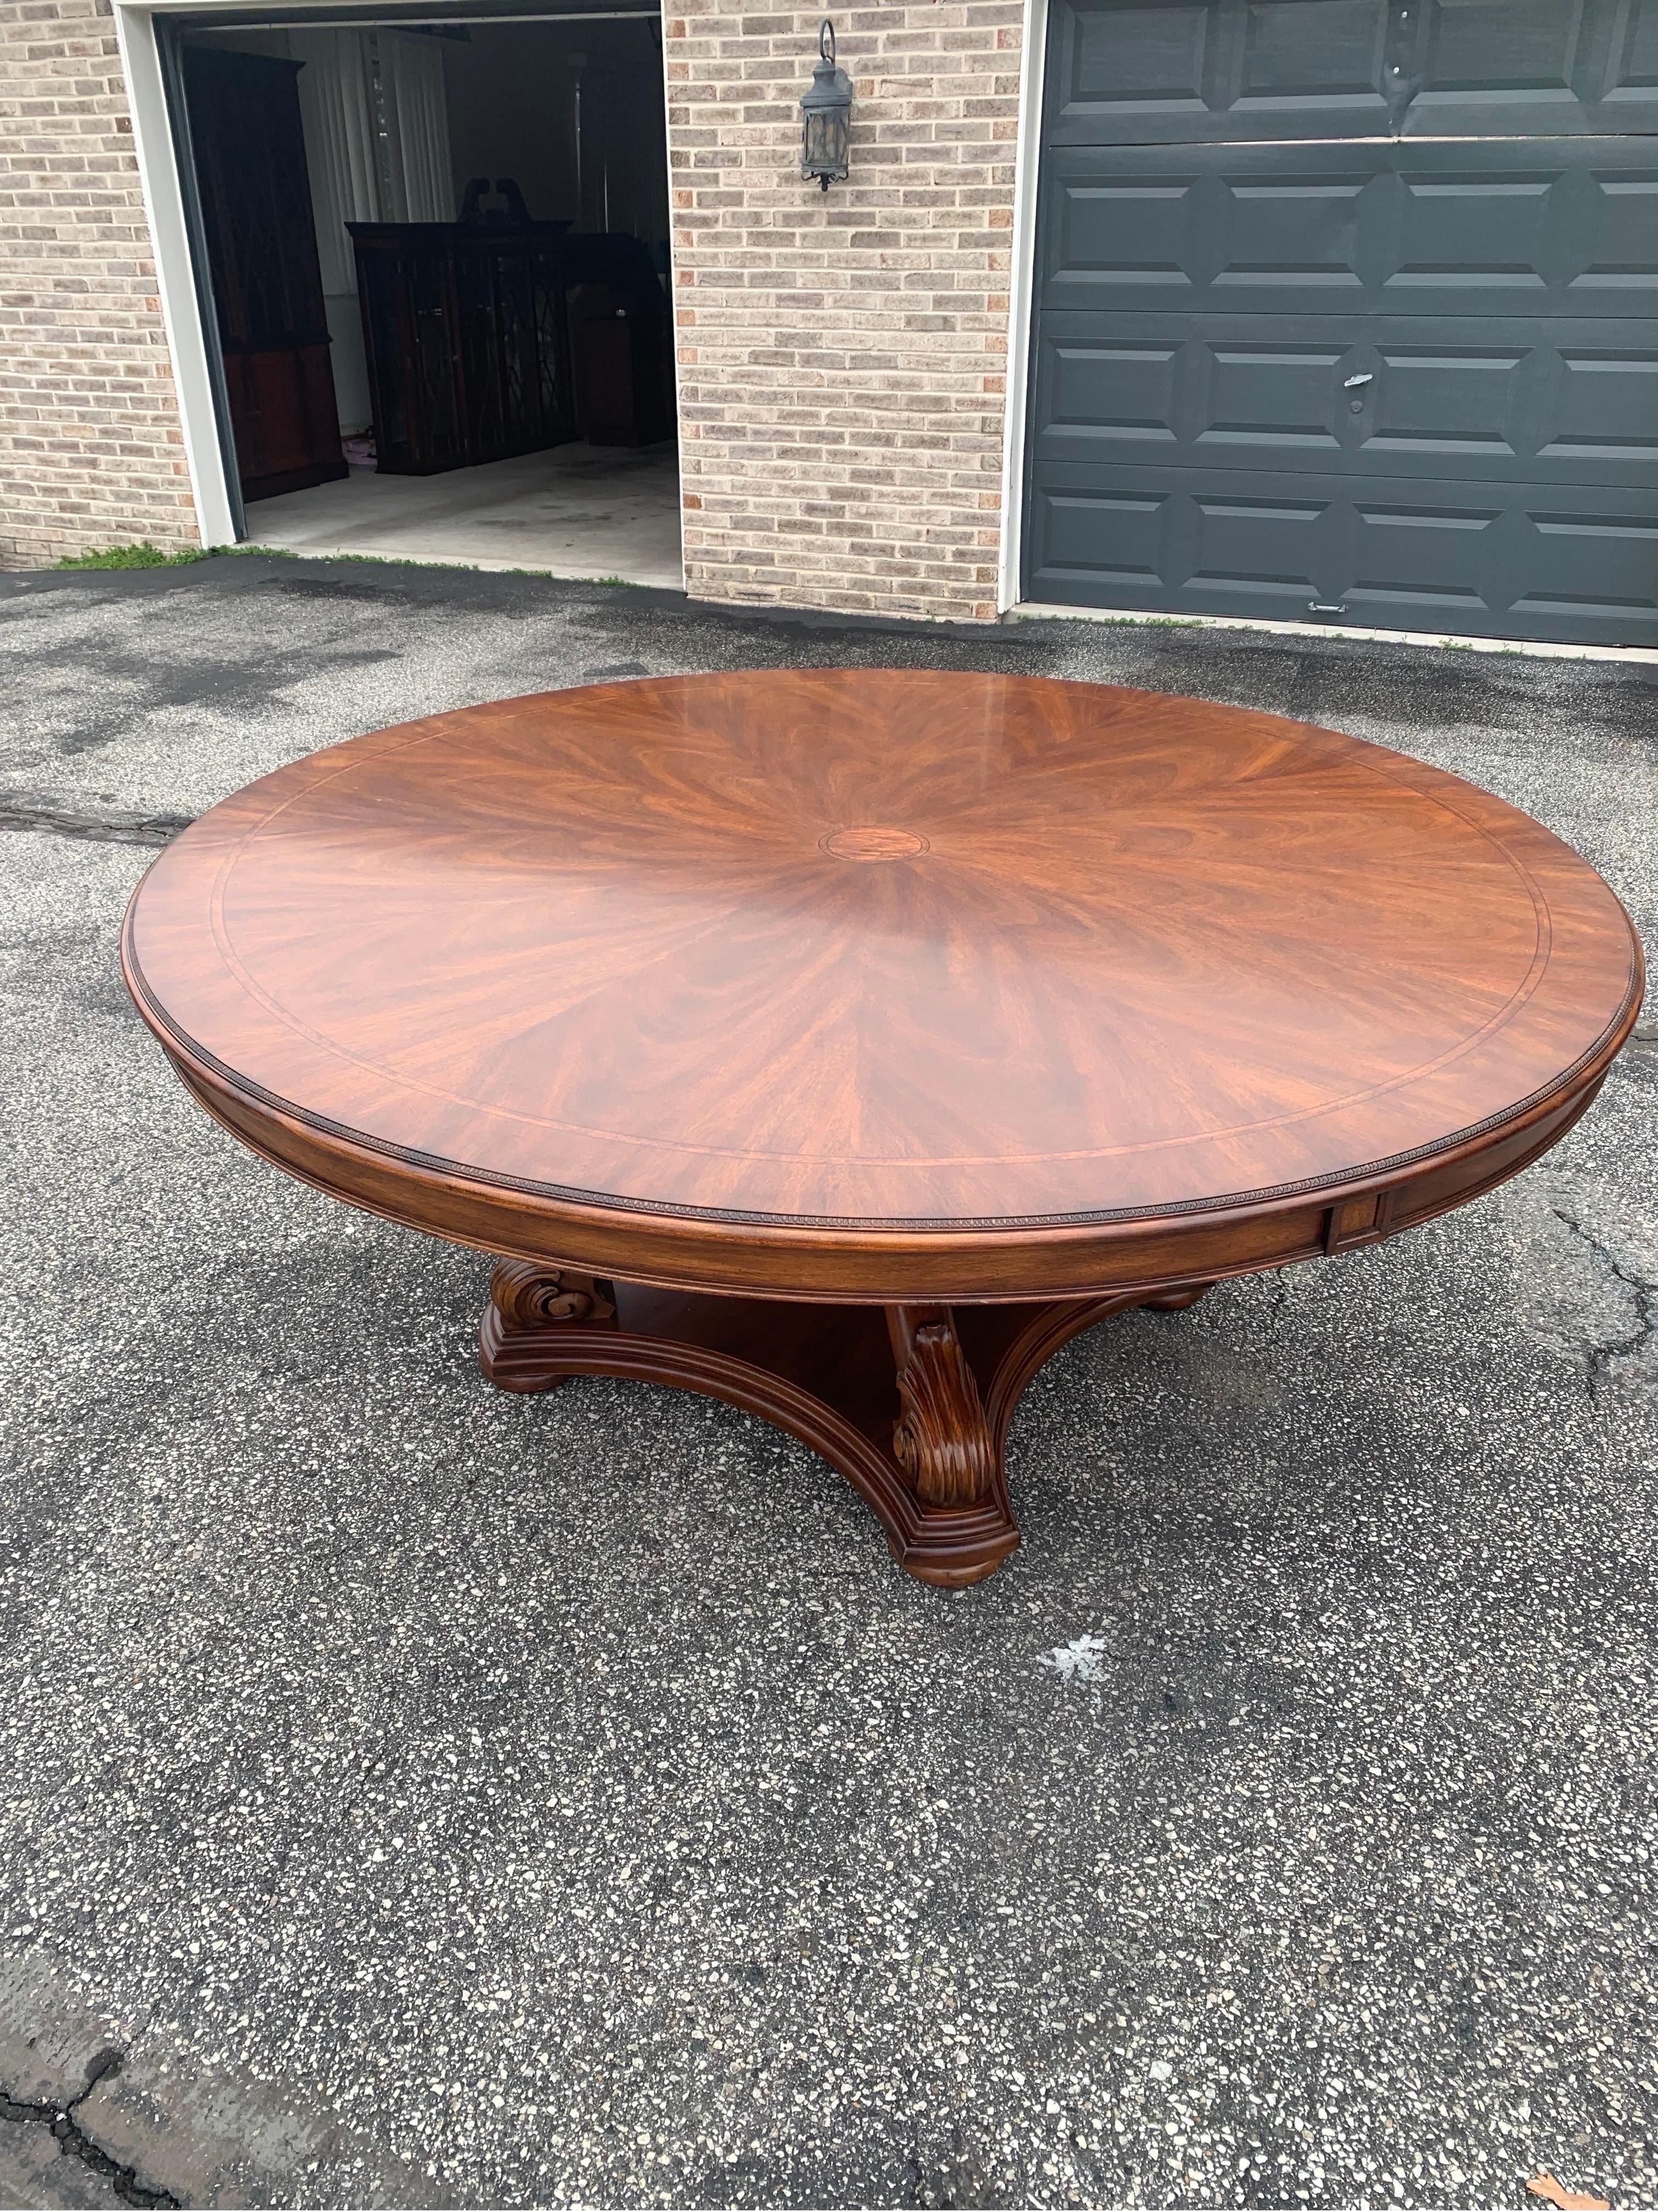 Henkel Harris Round Mahogany Inlaid Dining Table In Good Condition In Sparks Glencoe, MD